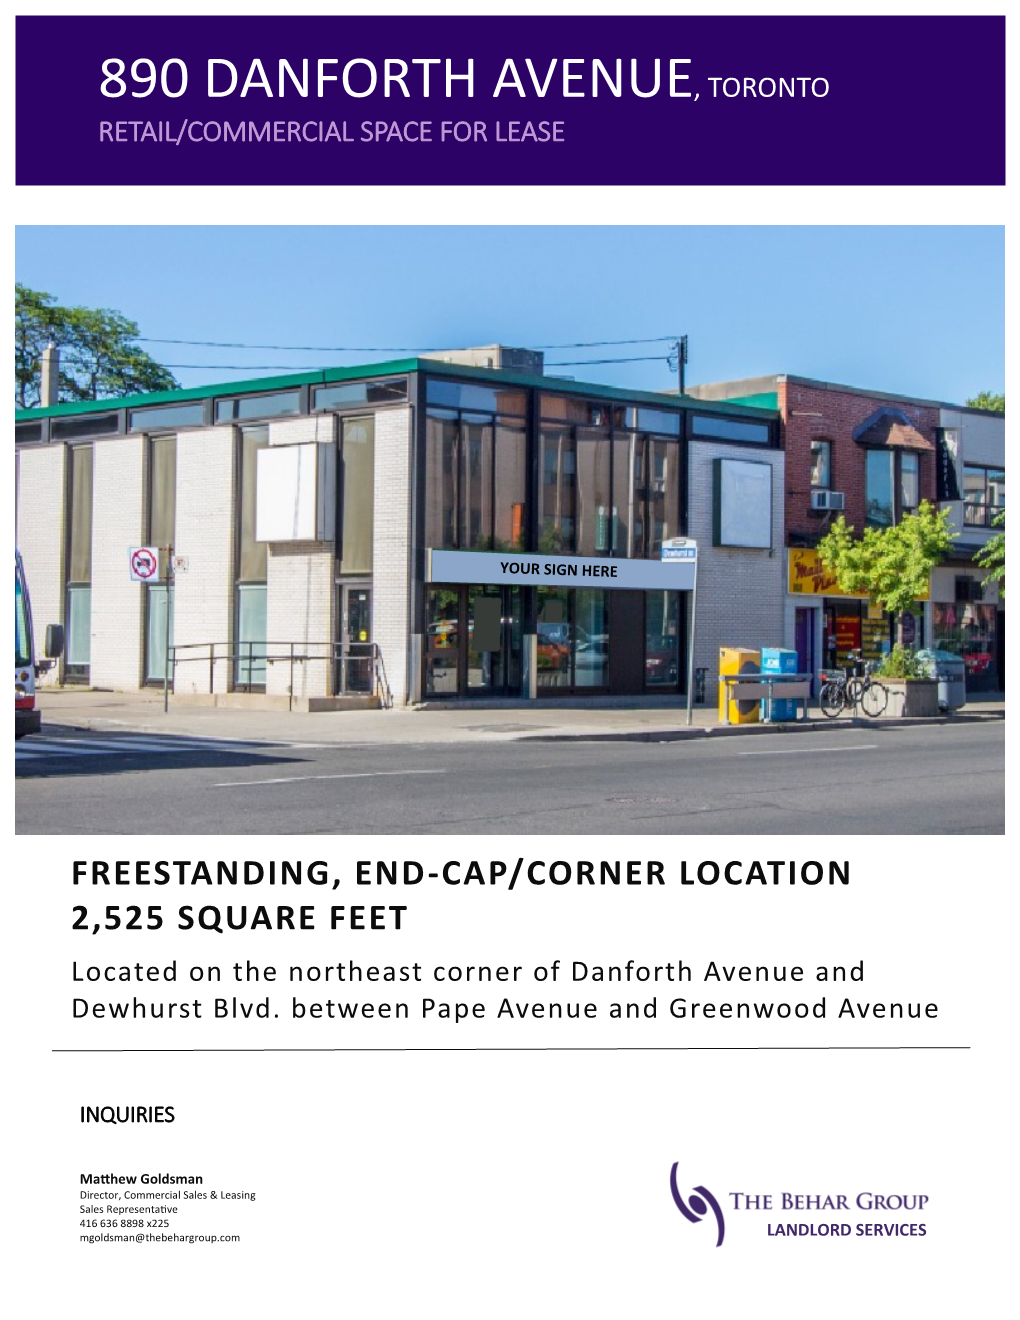 890 Danforth Avenue, Toronto Retail/Commercial Space for Lease